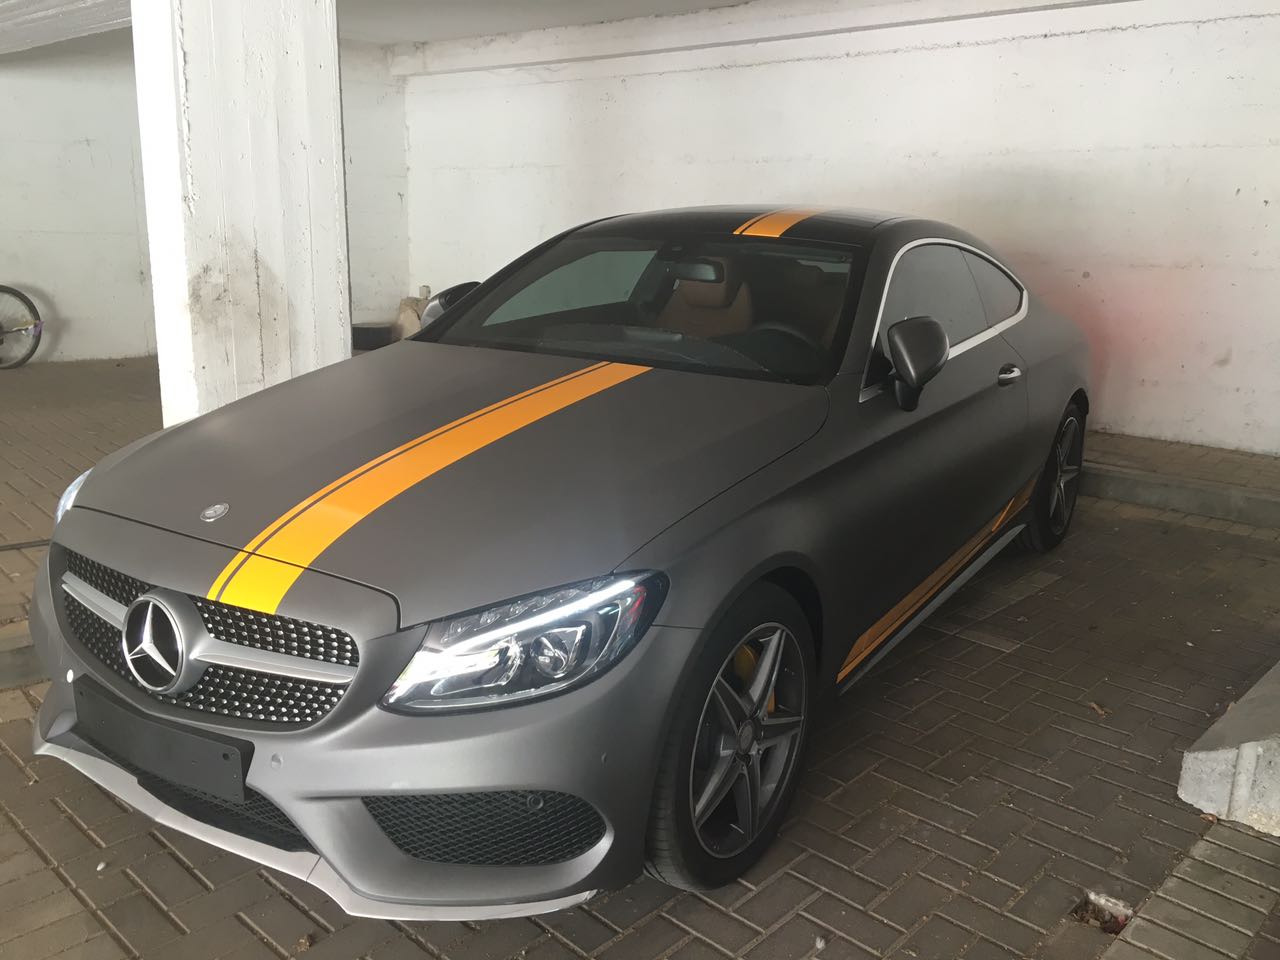 2017 c300 coupe wrapped. - MBWorld.org Forums